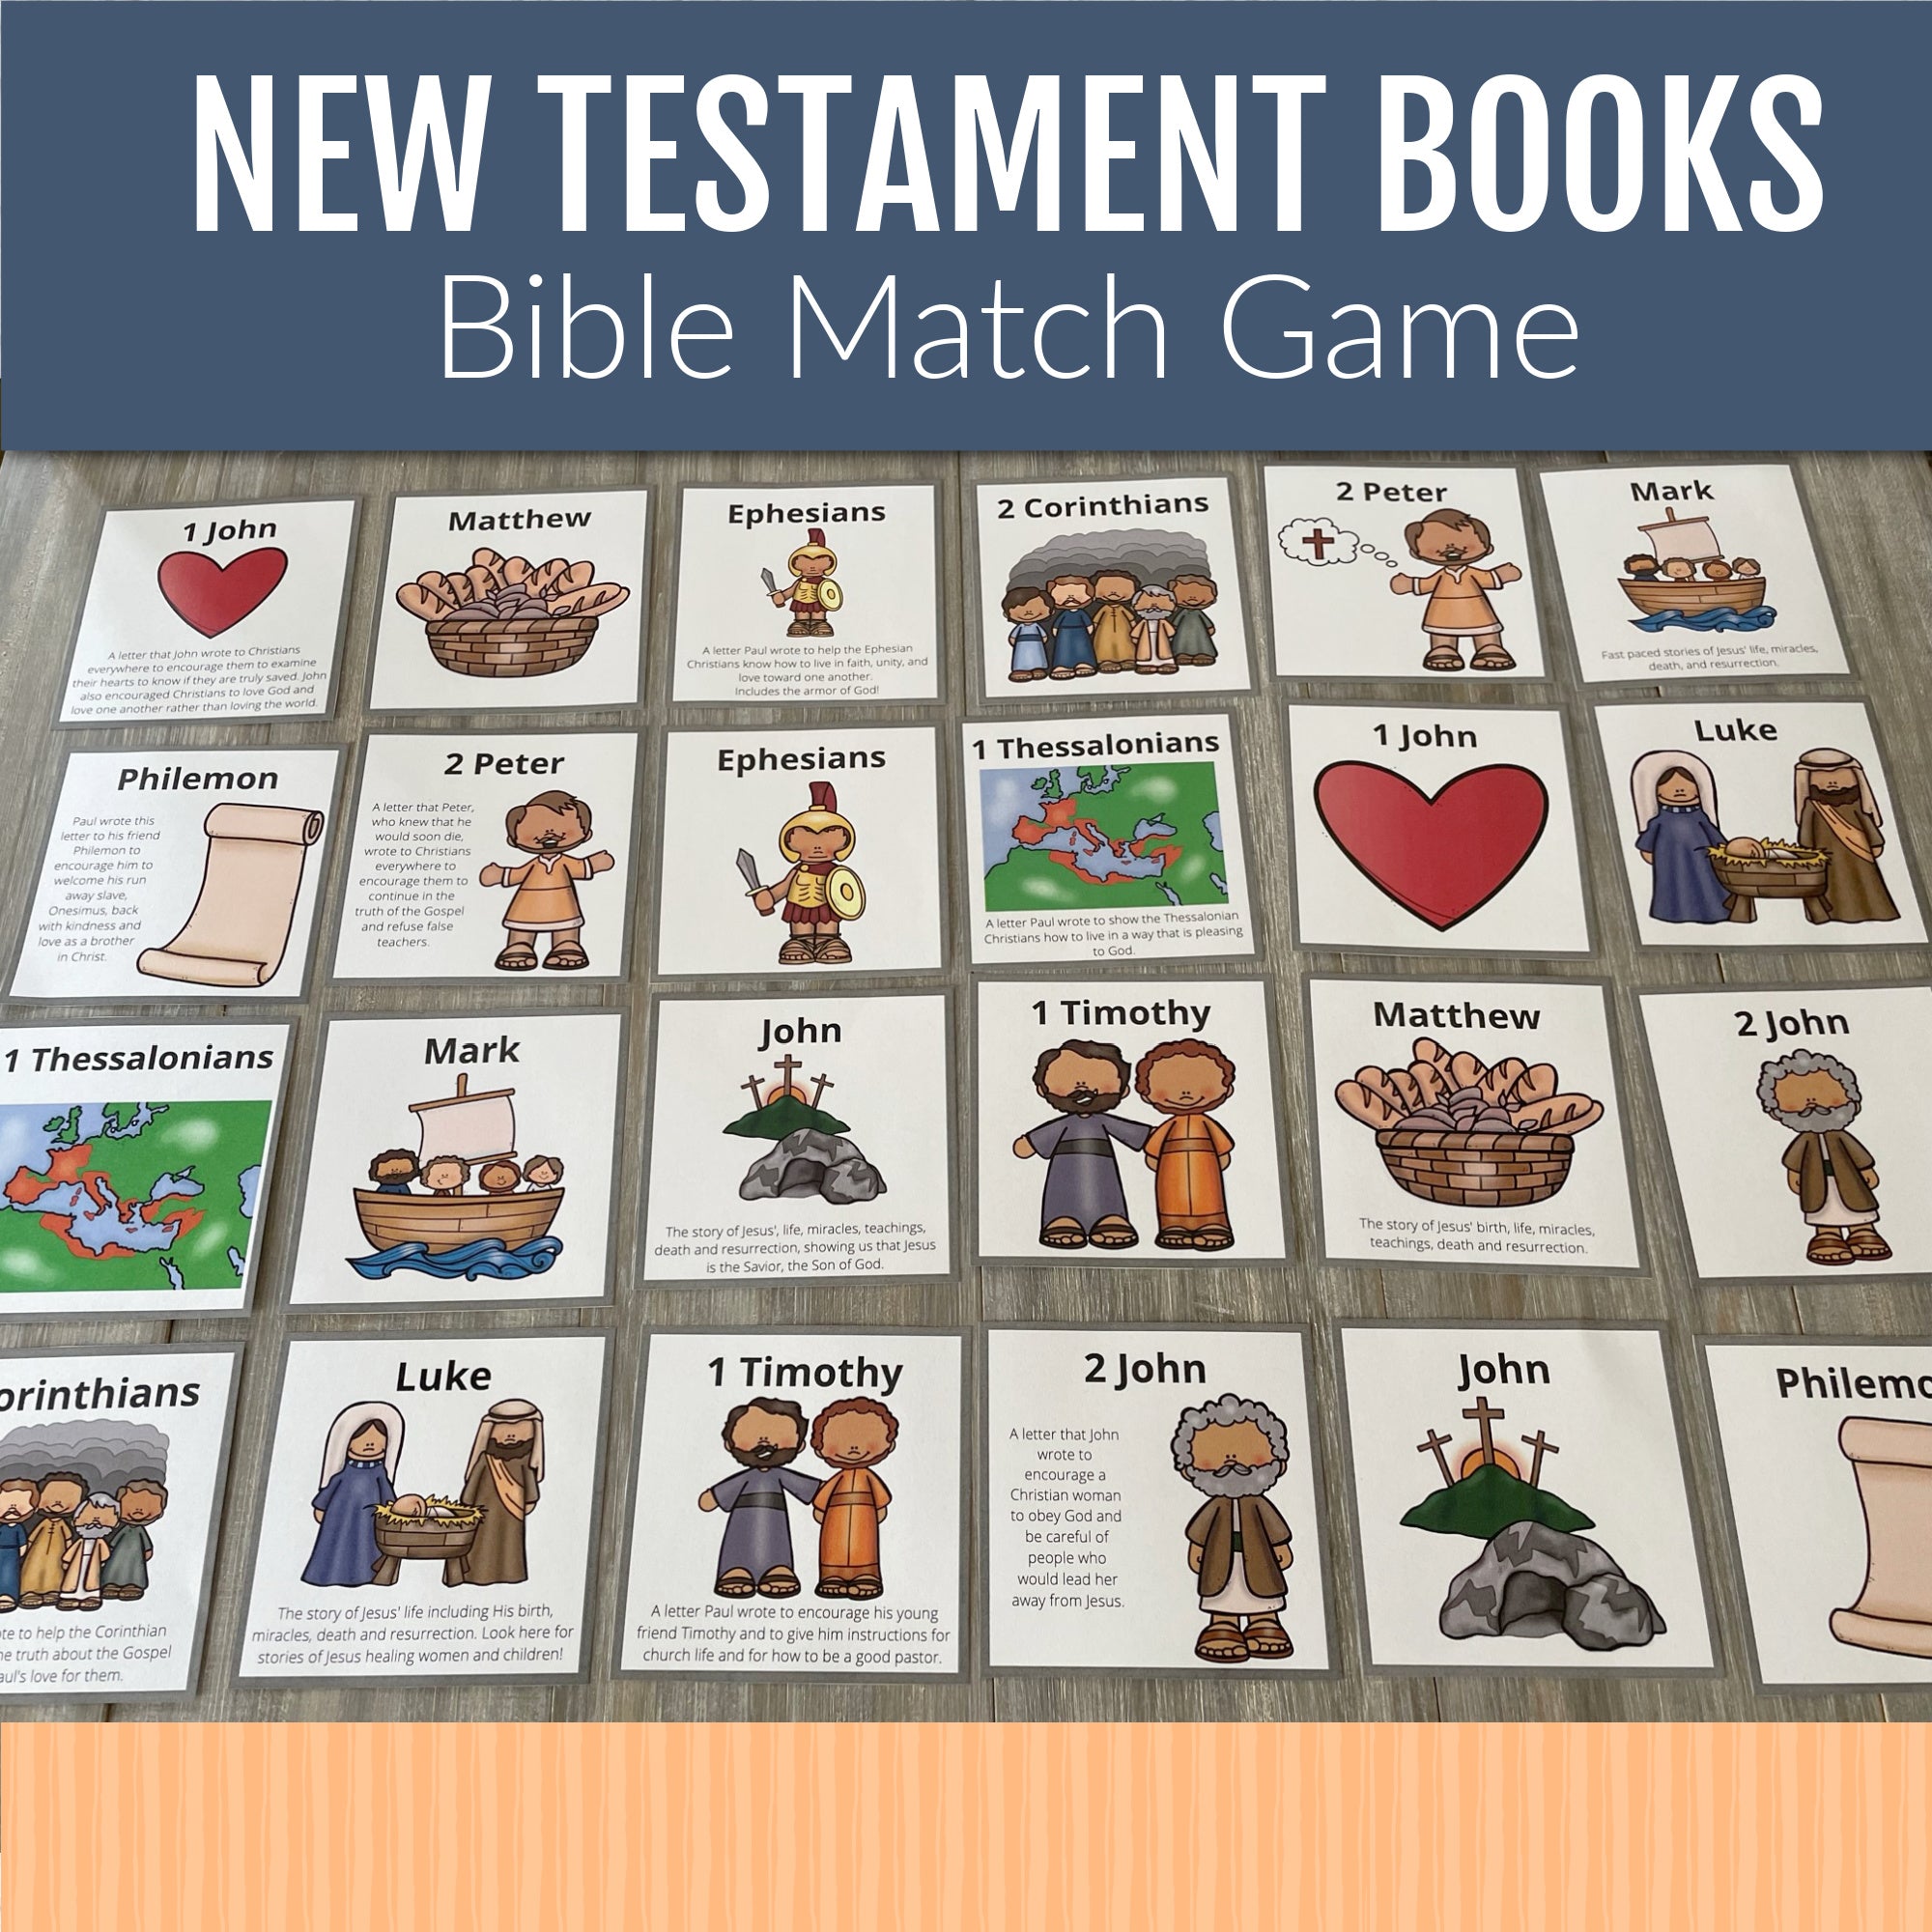 Bible Animals Click Clack Match Game, 2 to 6 Players, Ages 6 & Older, Mardel